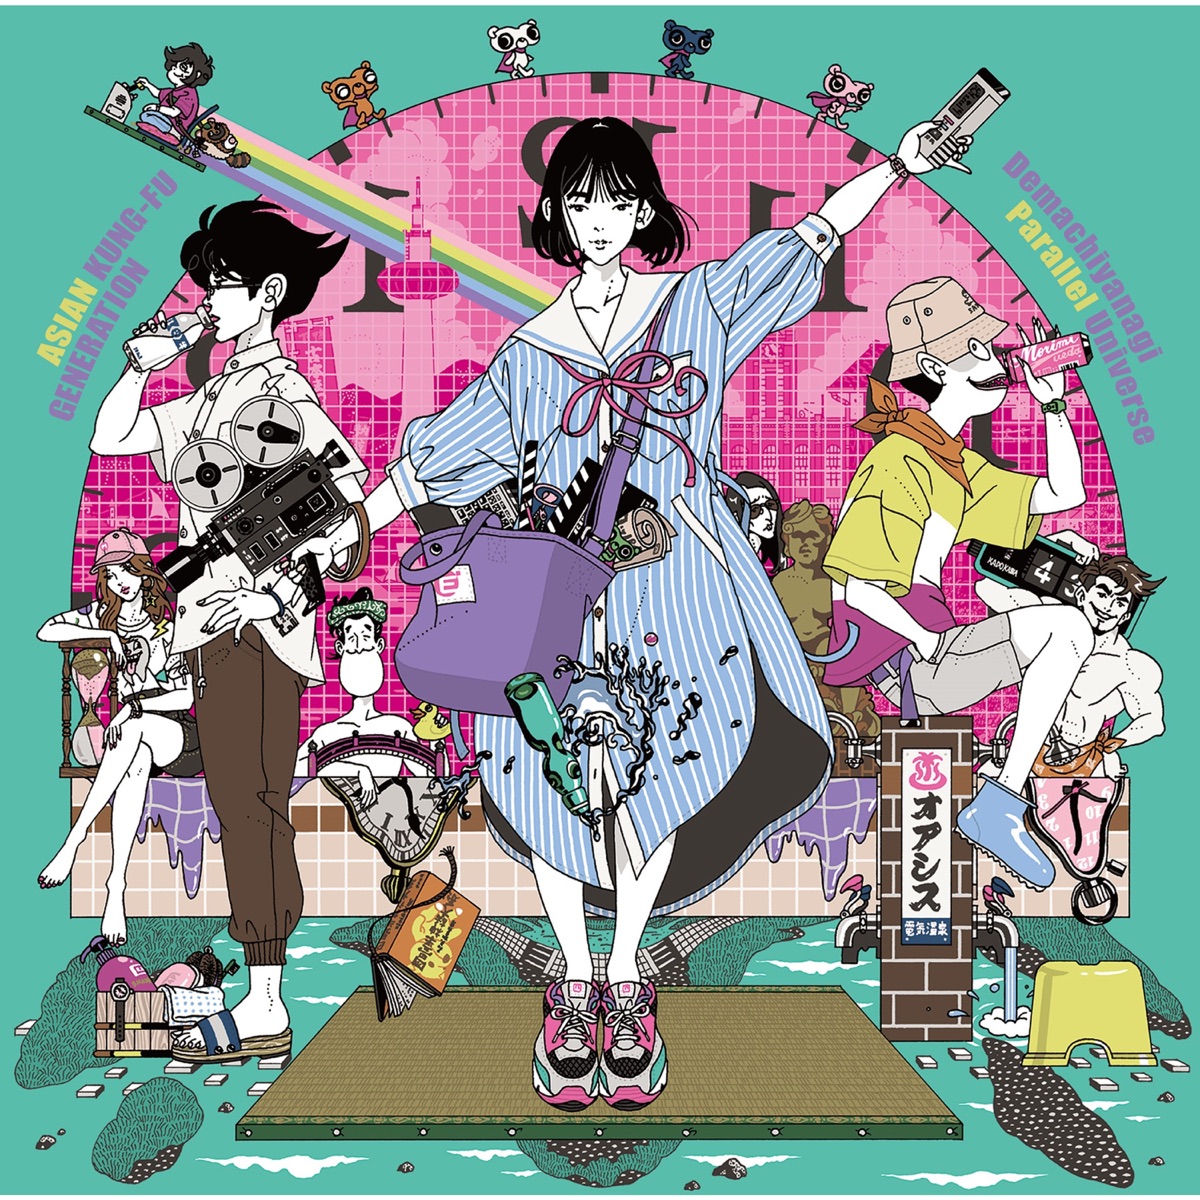 Cover art for『ASIAN KUNG-FU GENERATION - I Just Threw Out The Love Of My Dreams』from the release『Demachiyanagi Parallel Universe』